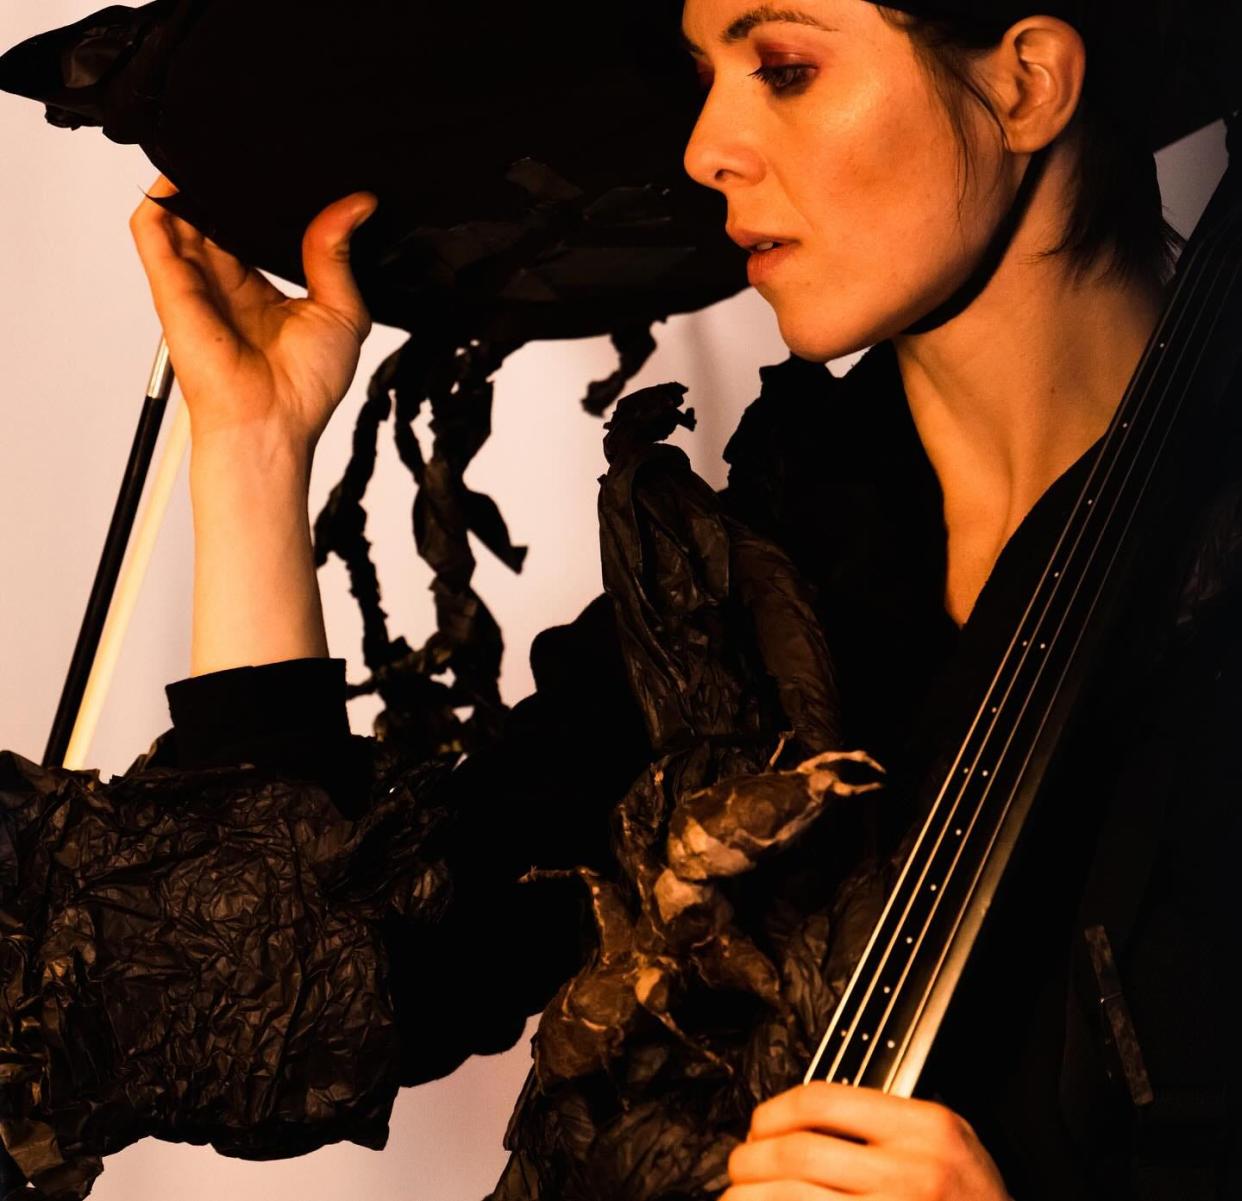 Rachel Icenogle is a cellist and composer based in Calabria, Italy, originally from Ripon. She will perform April 27 at Thrasher Opera House in Green Lake.